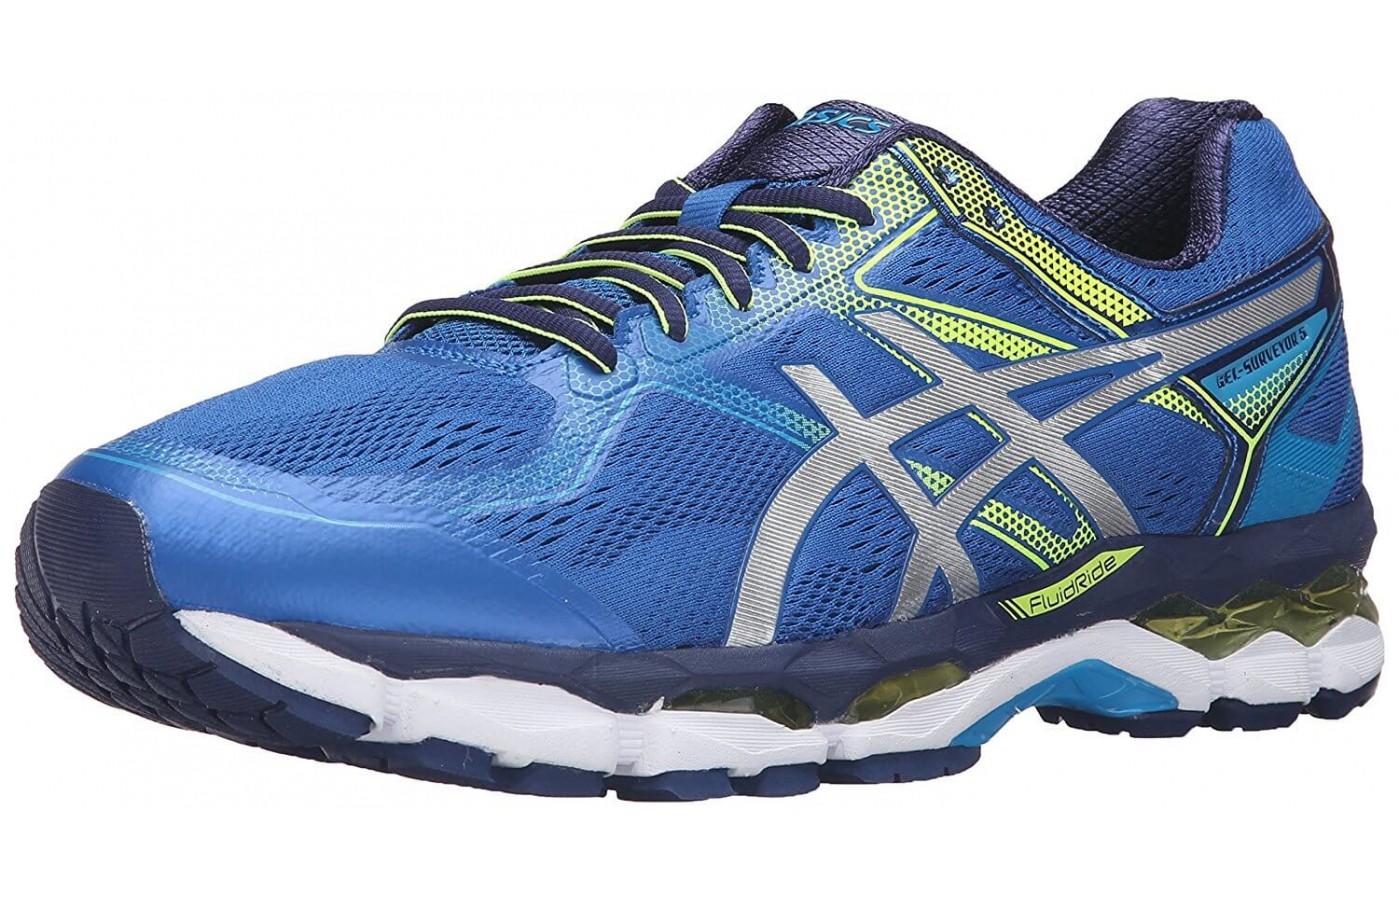 An angled perspective of the ASICS GEL-Surveyor 5.